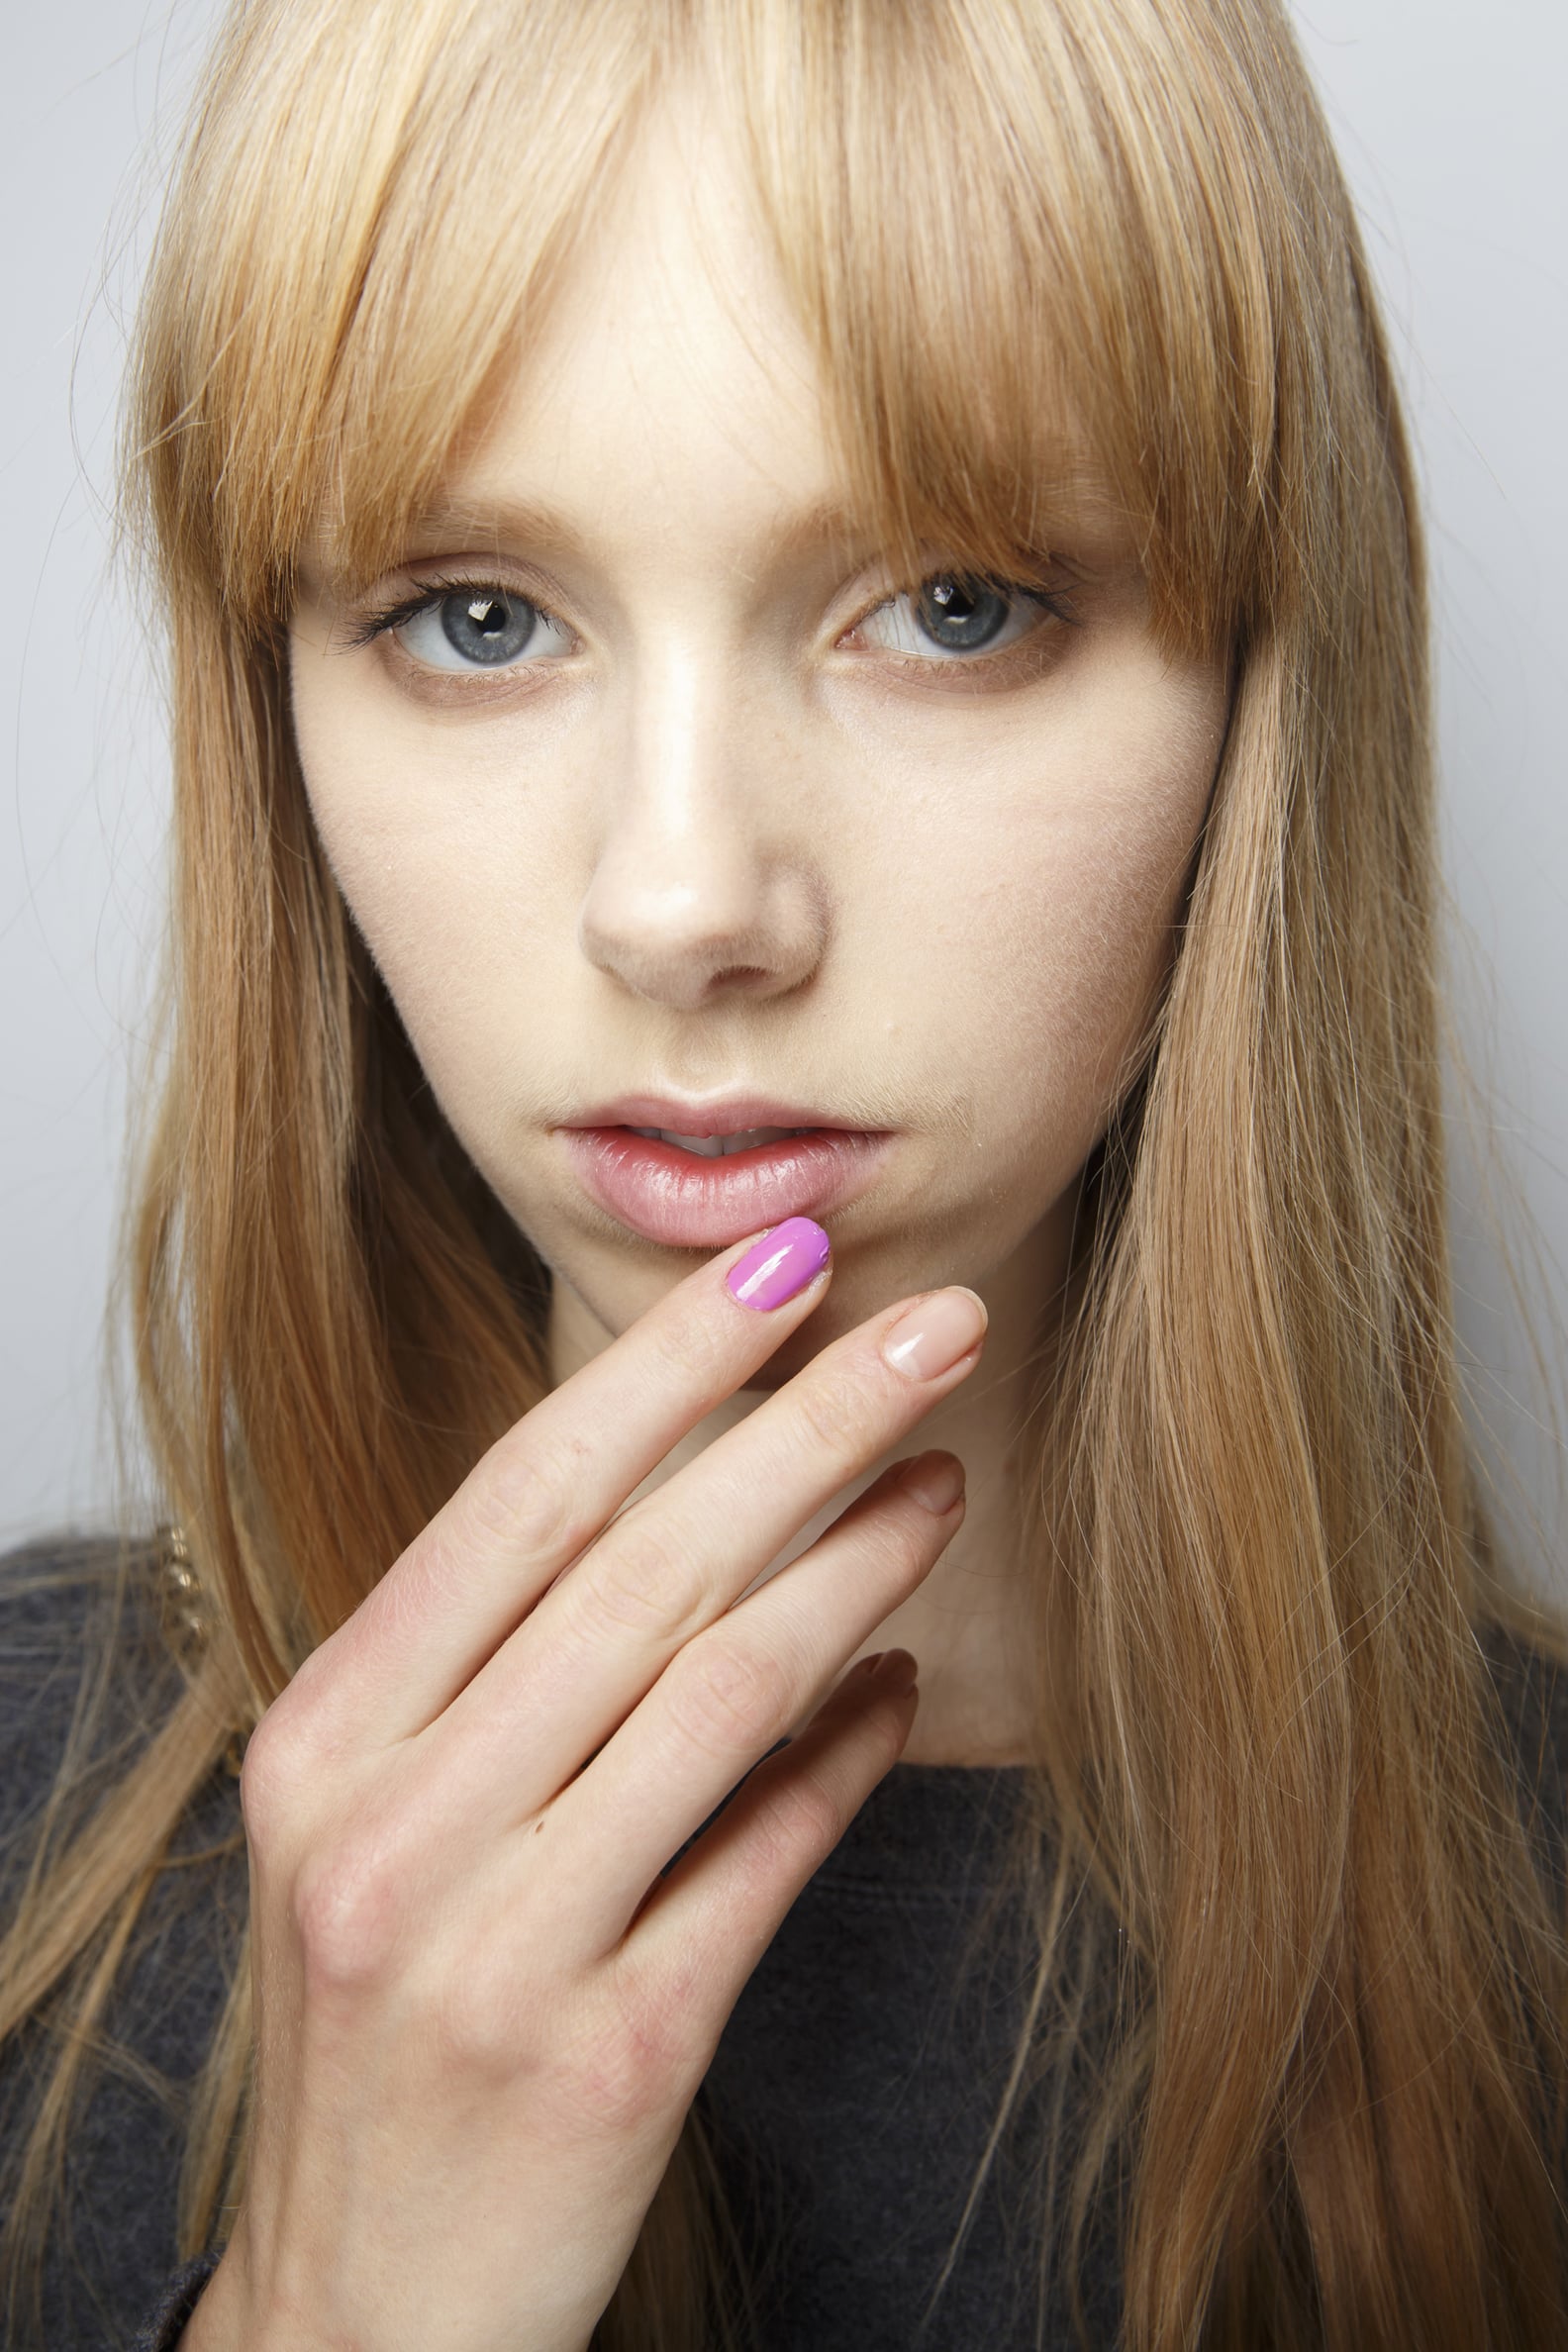 Accent Nail Pointer Finger Trend | POPSUGAR Beauty